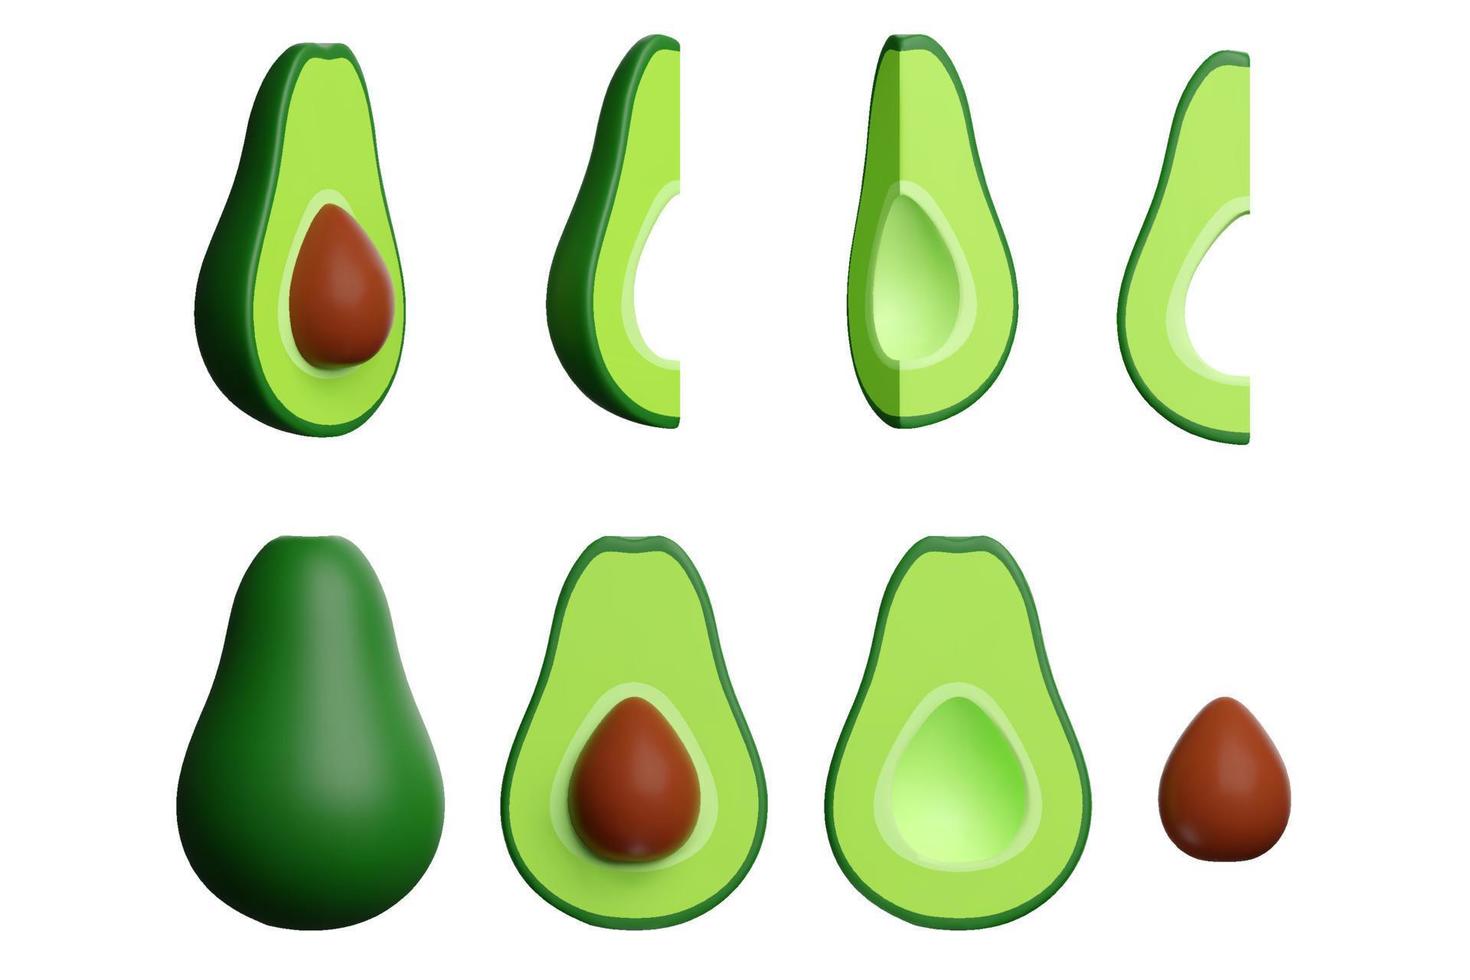 3d green avocado, set of fresh whole, half, cut slice, with a large seed. Vegetable food, fresh organic fruit for healthy lifestyle. Vector illustration realistic cartoon style isolated